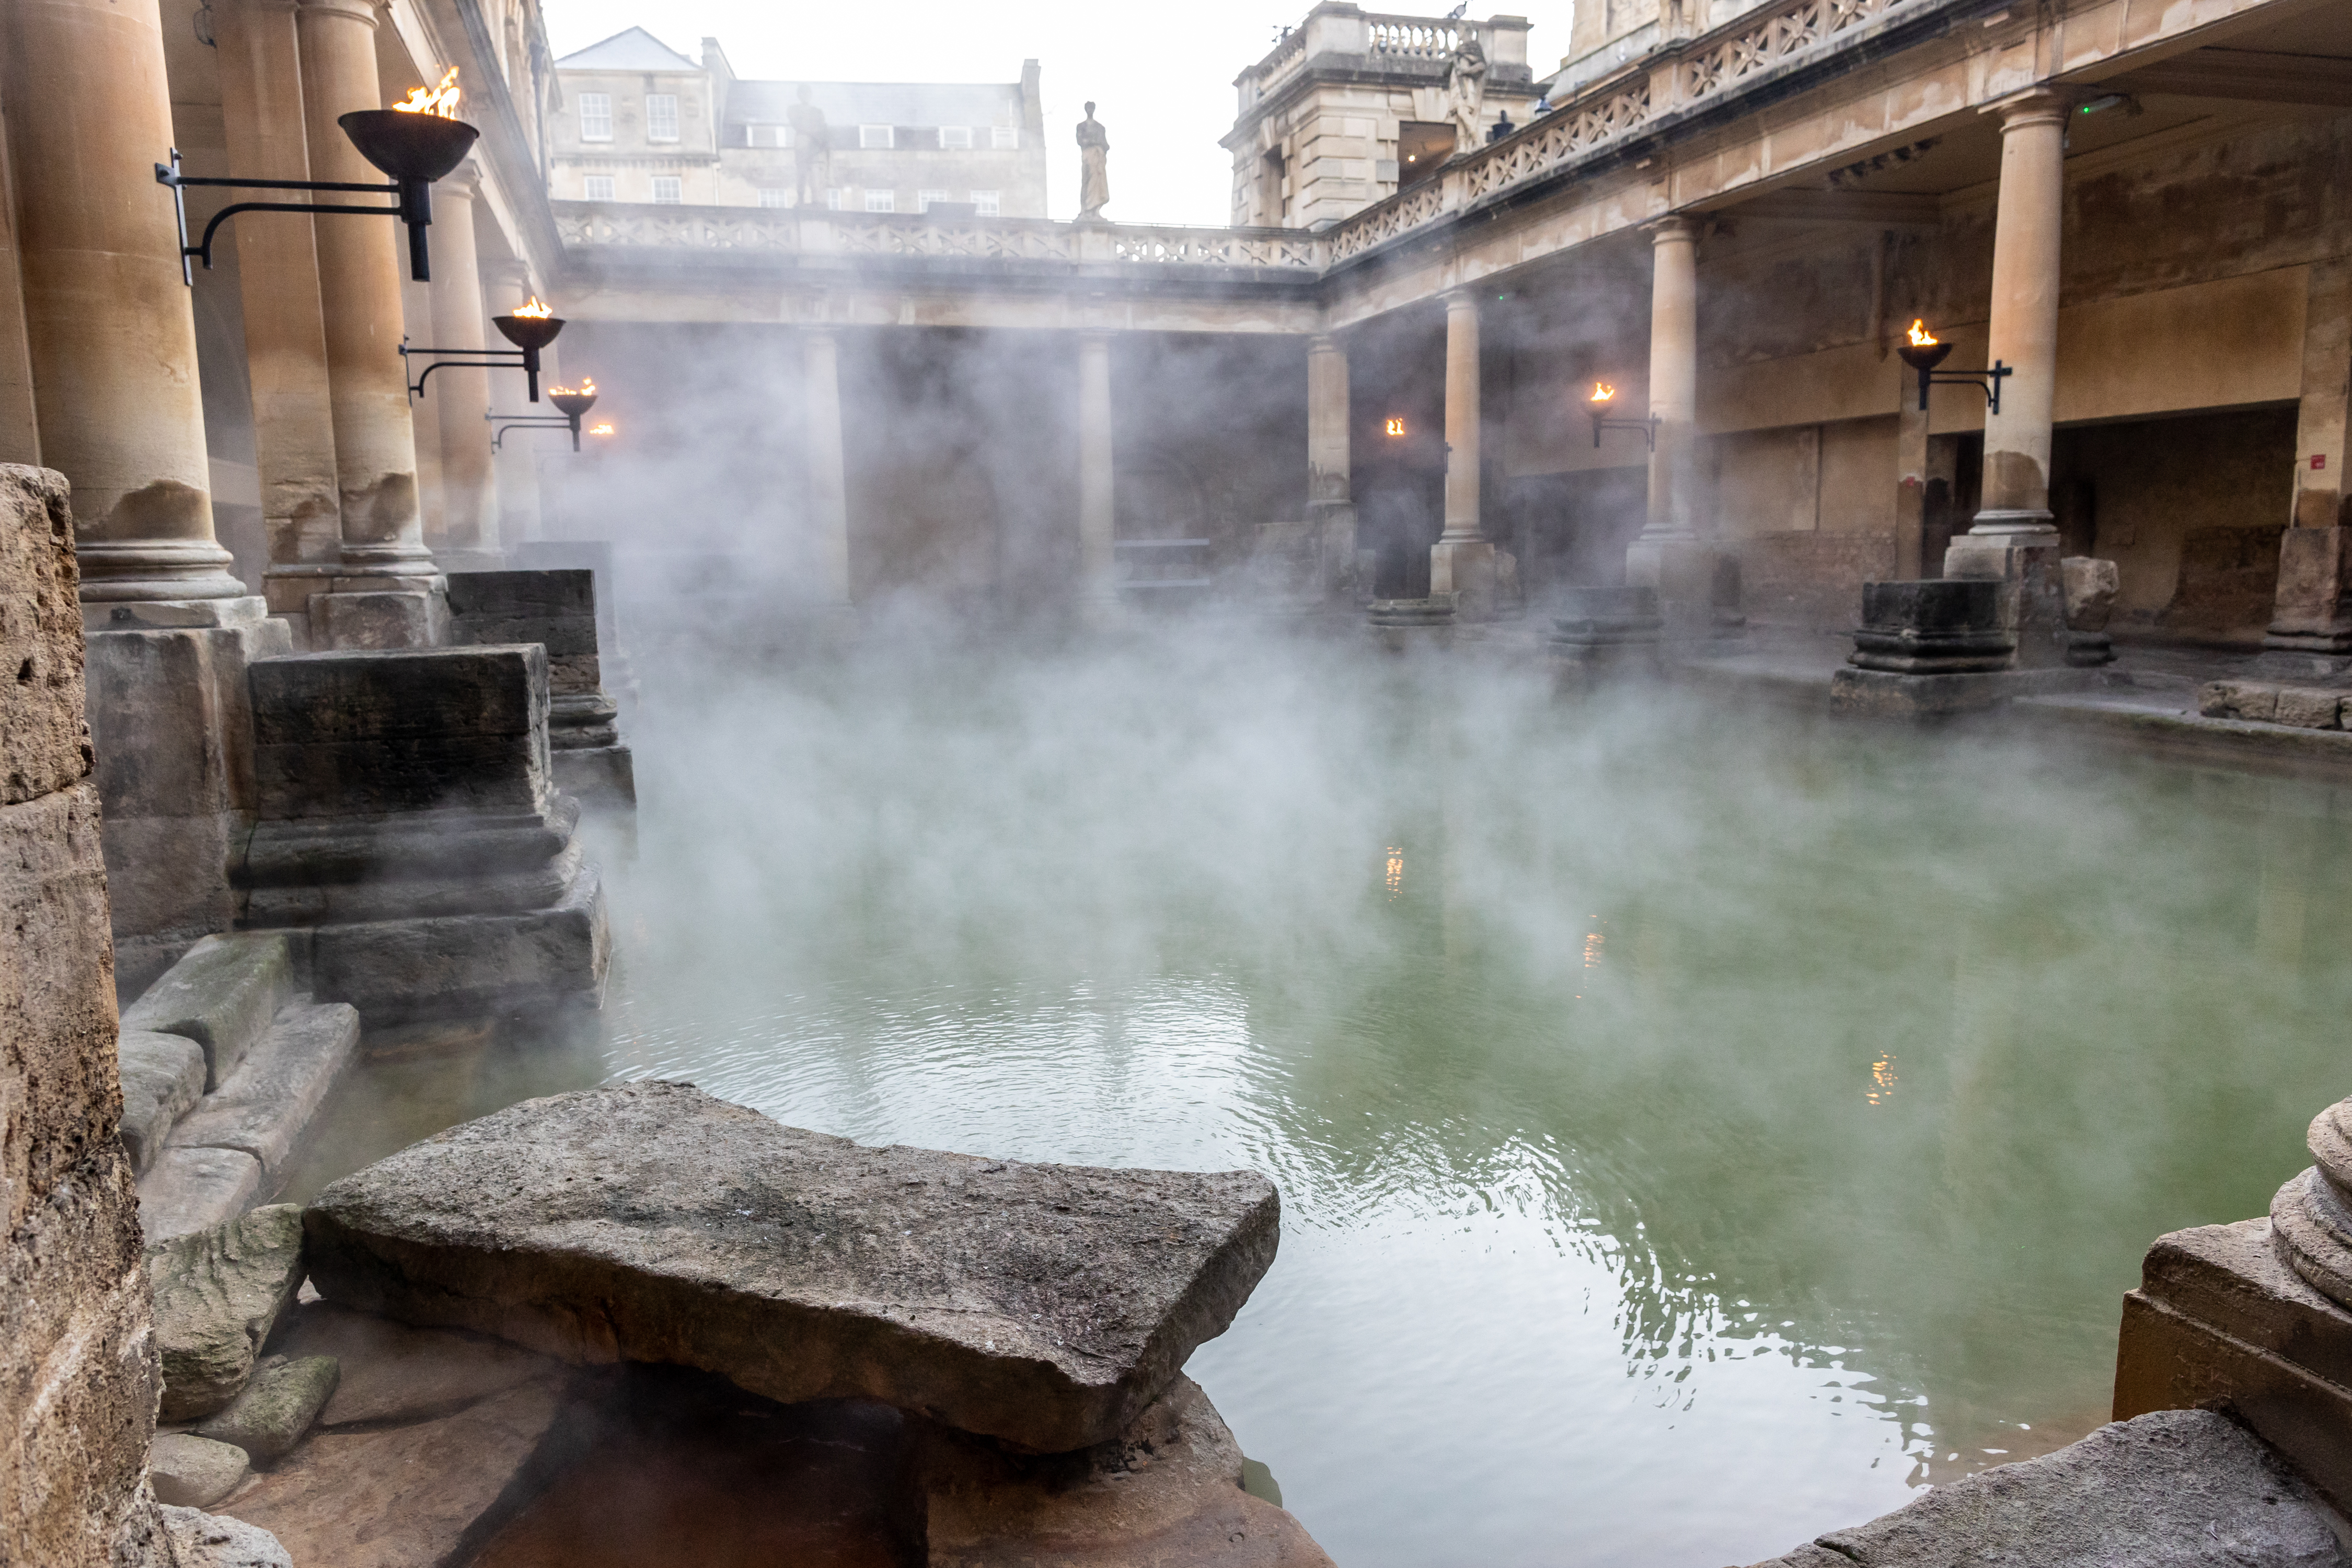 Image: Steam rising up from the Great Bath